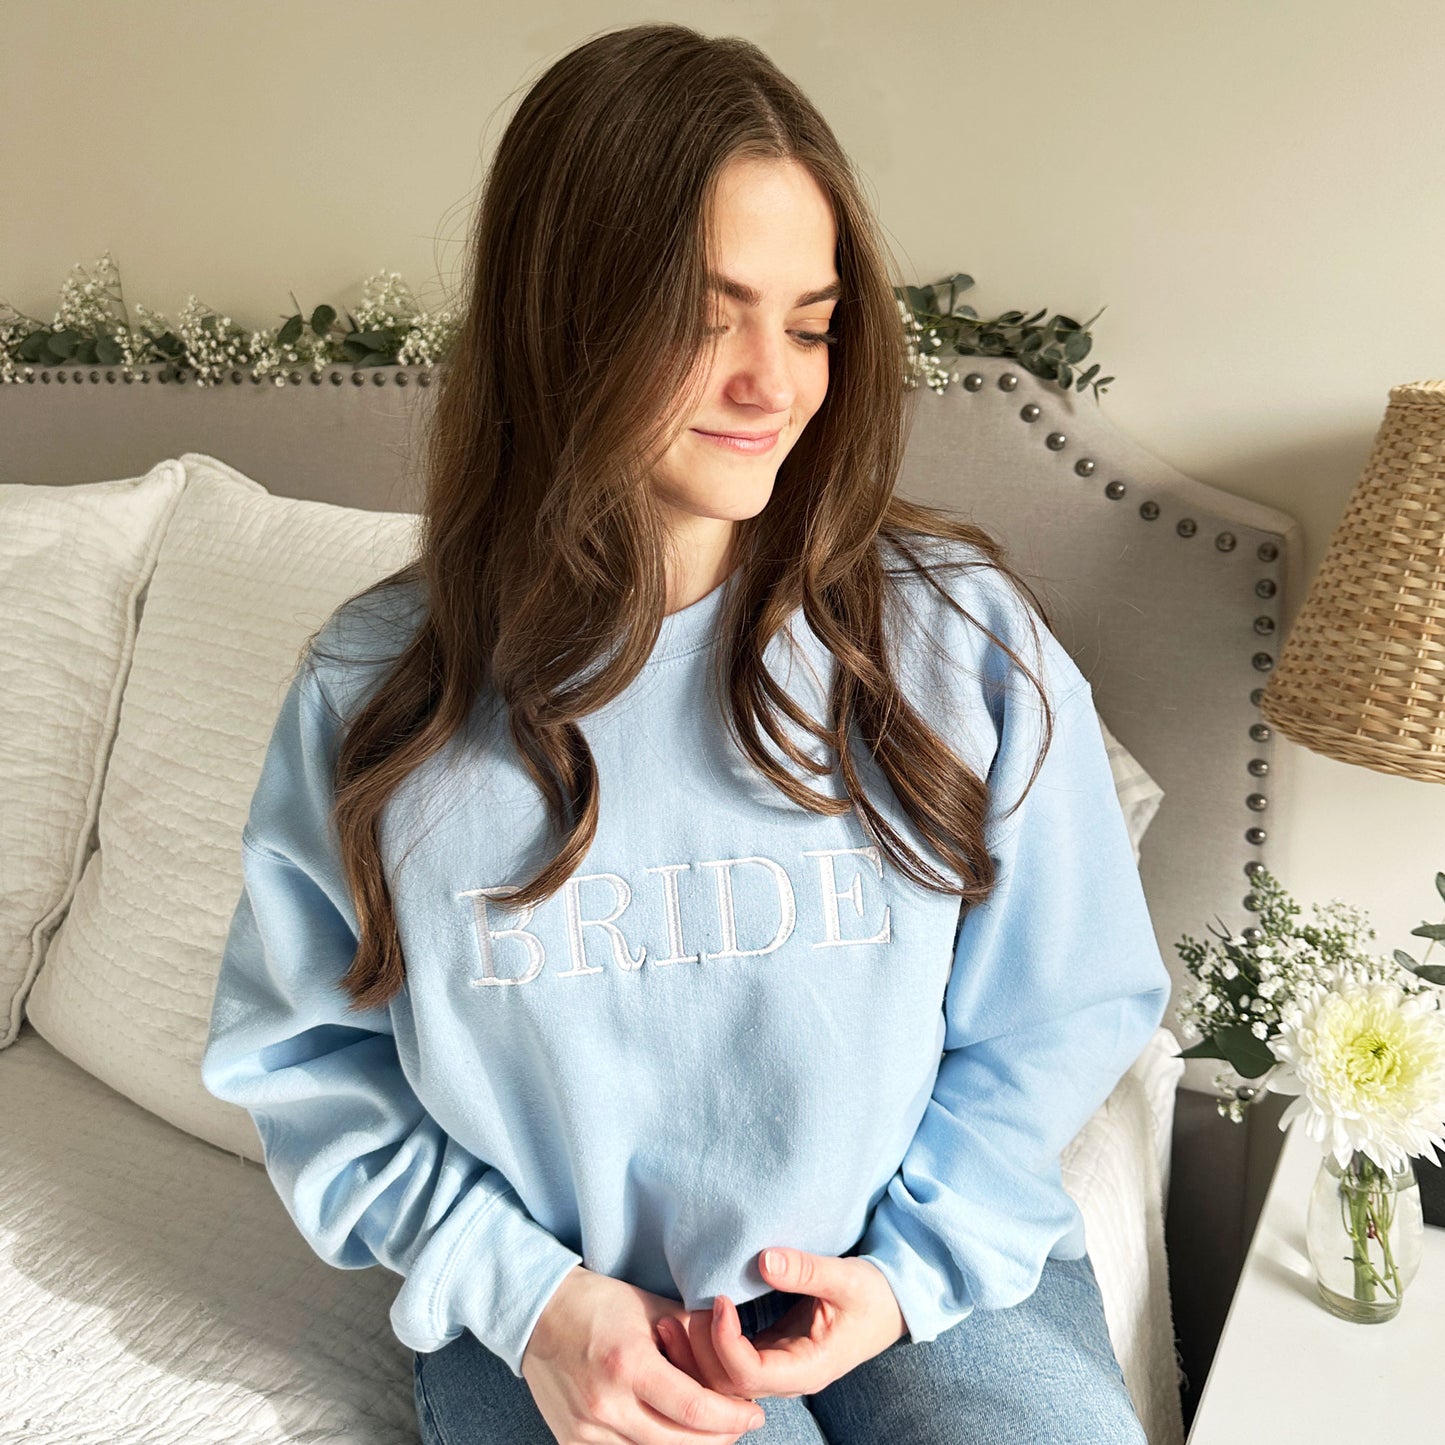 Young woman wearing a light blue crewneck sweatshirt with all caps bride embroidered in white thread